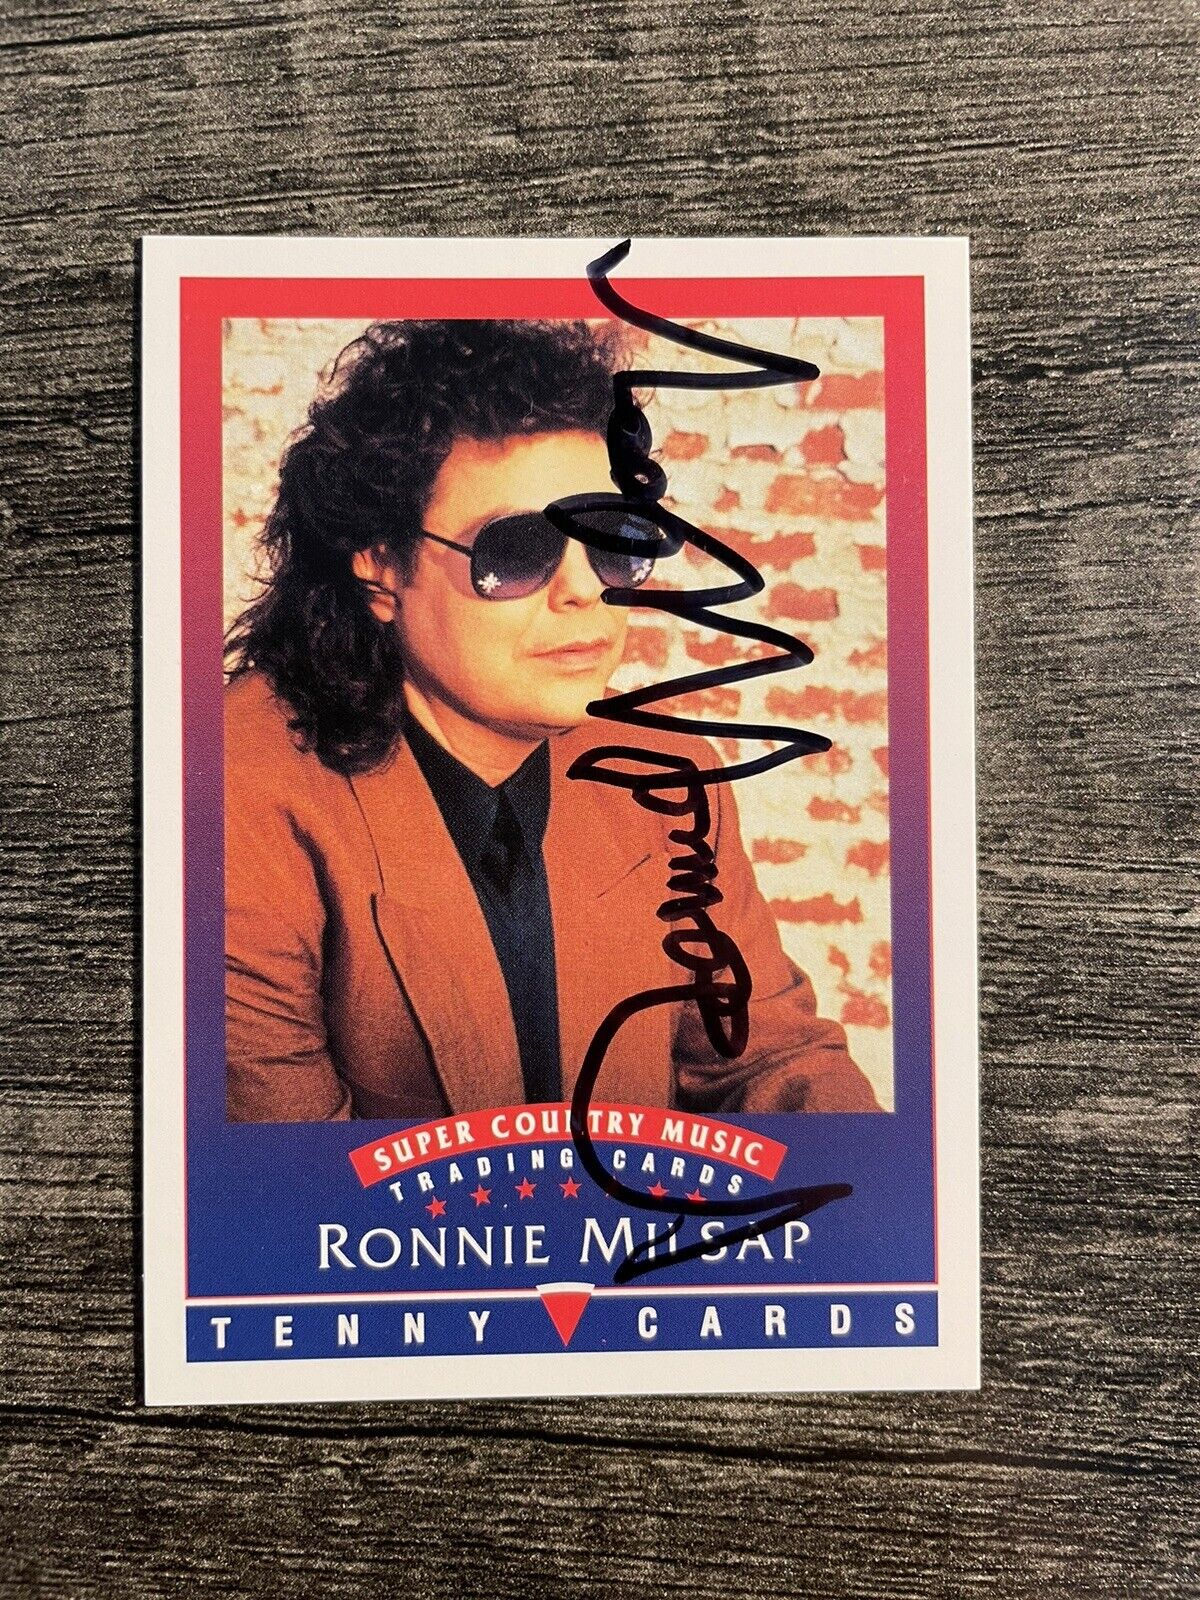 1992 Tenny Cards Super Country Music Ronnie Milsap Signed Card Auto